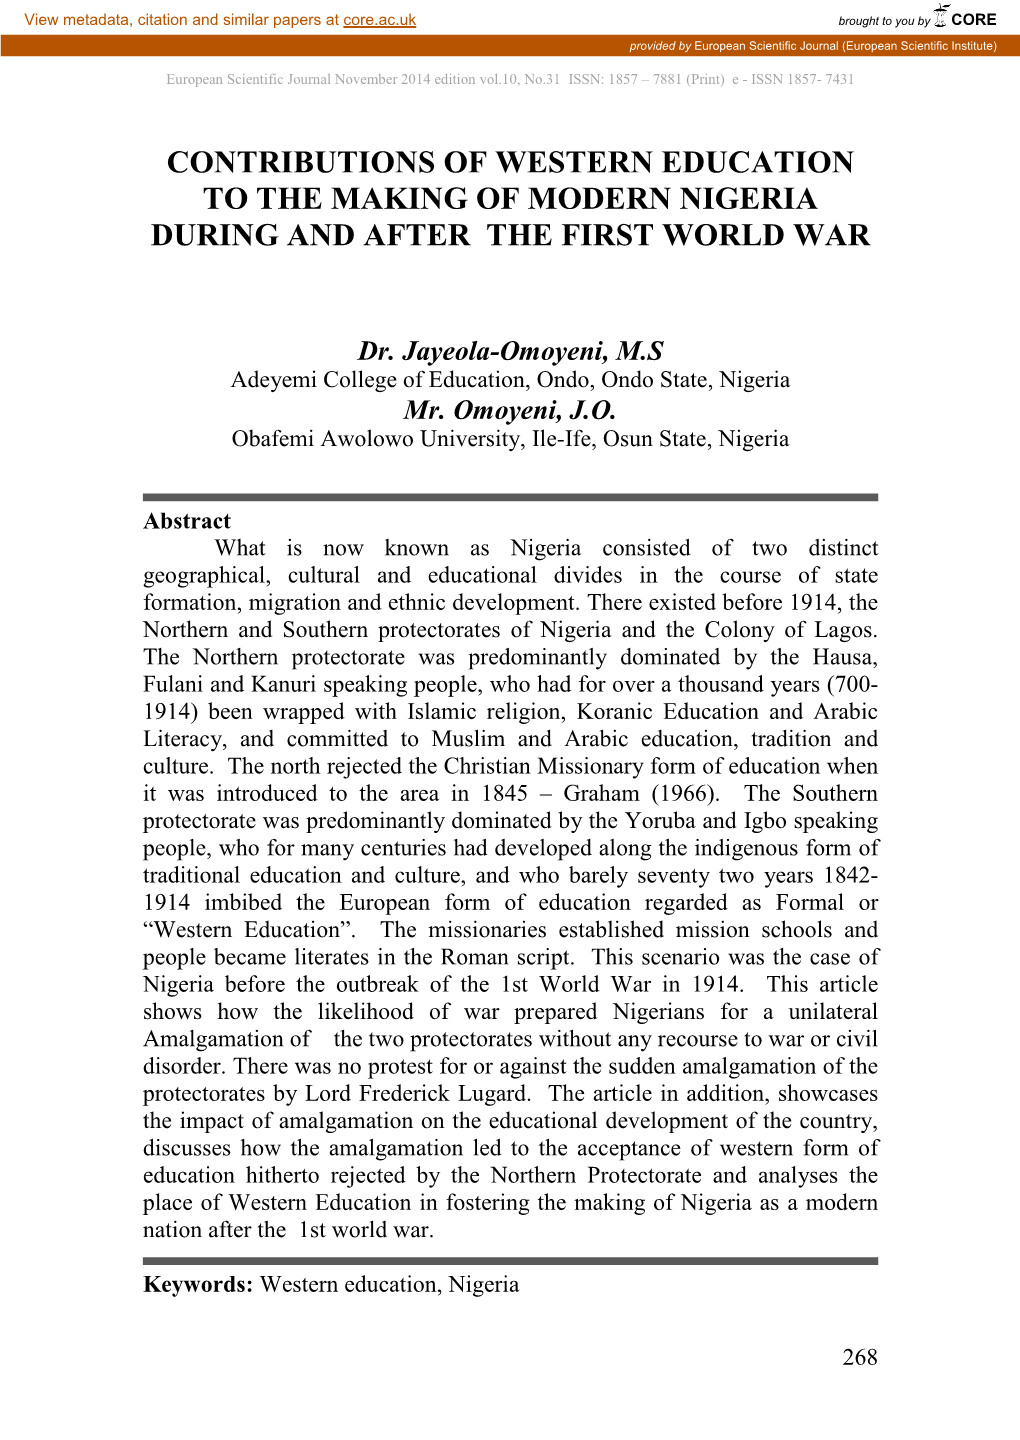 Contributions of Western Education to the Making of Modern Nigeria During and After the First World War